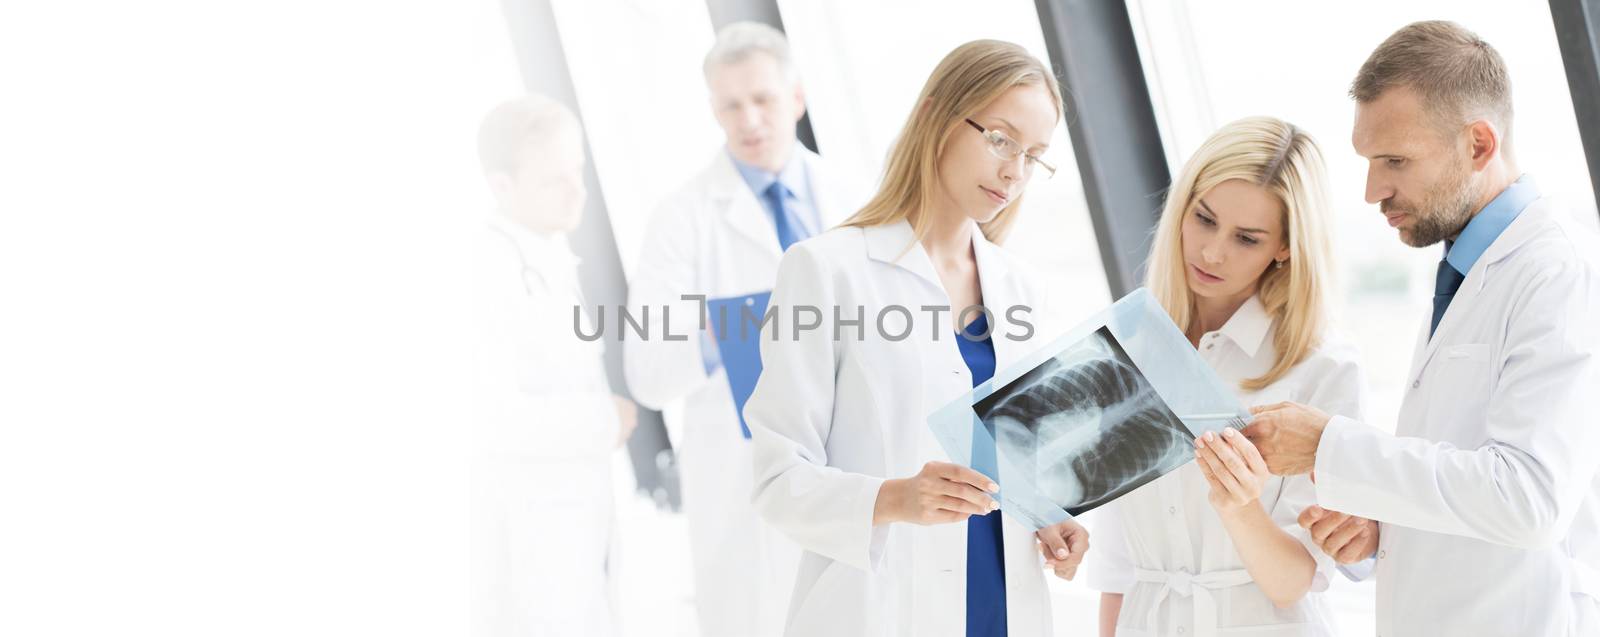 Team of experts doctors looking at MRI picture at hospital office meeting